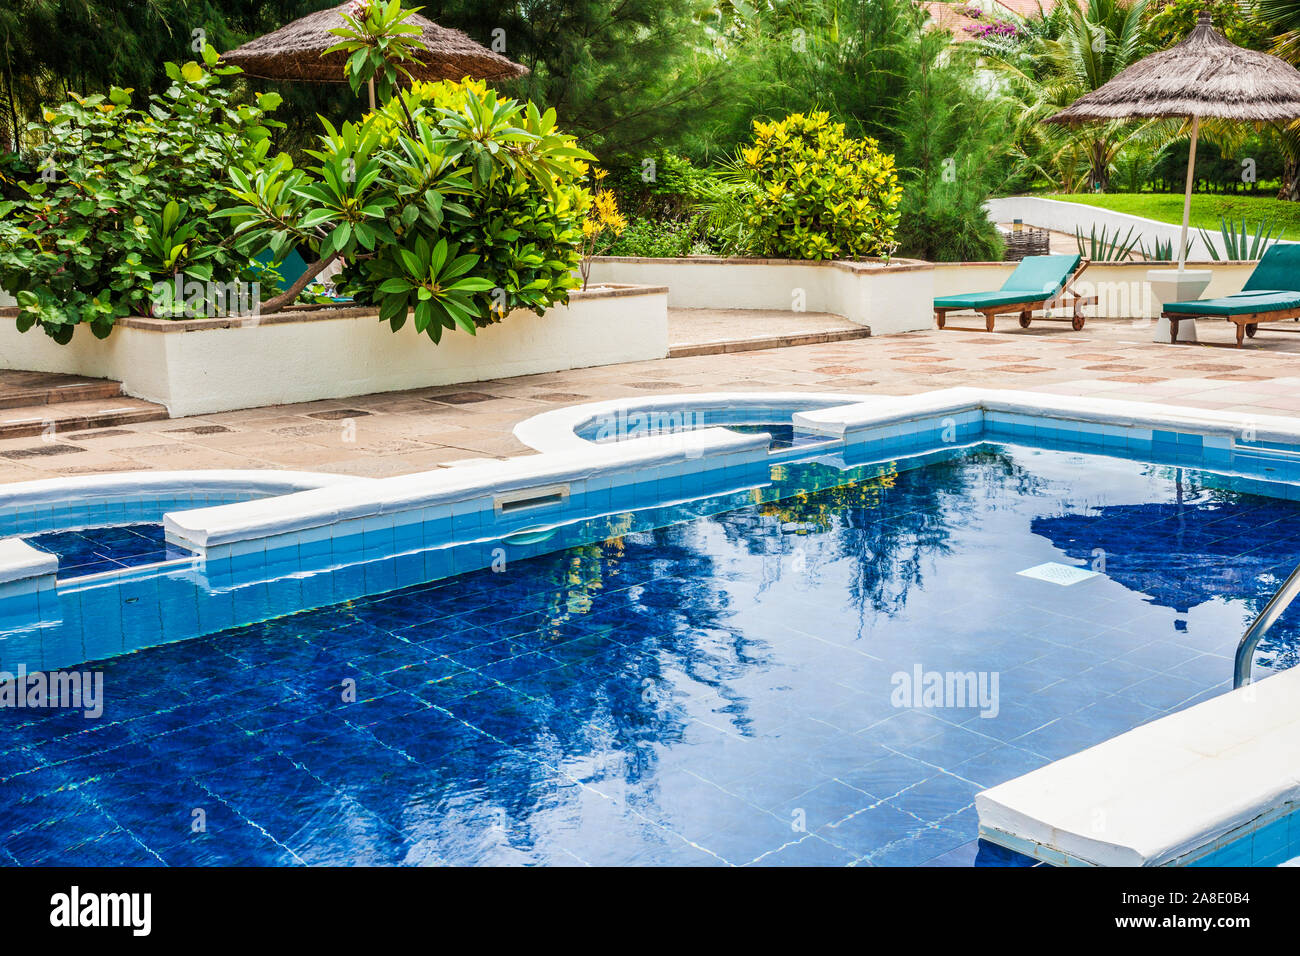 A plunge pool at a luxury holiday complex in the Gambia, West Africa. Stock Photo